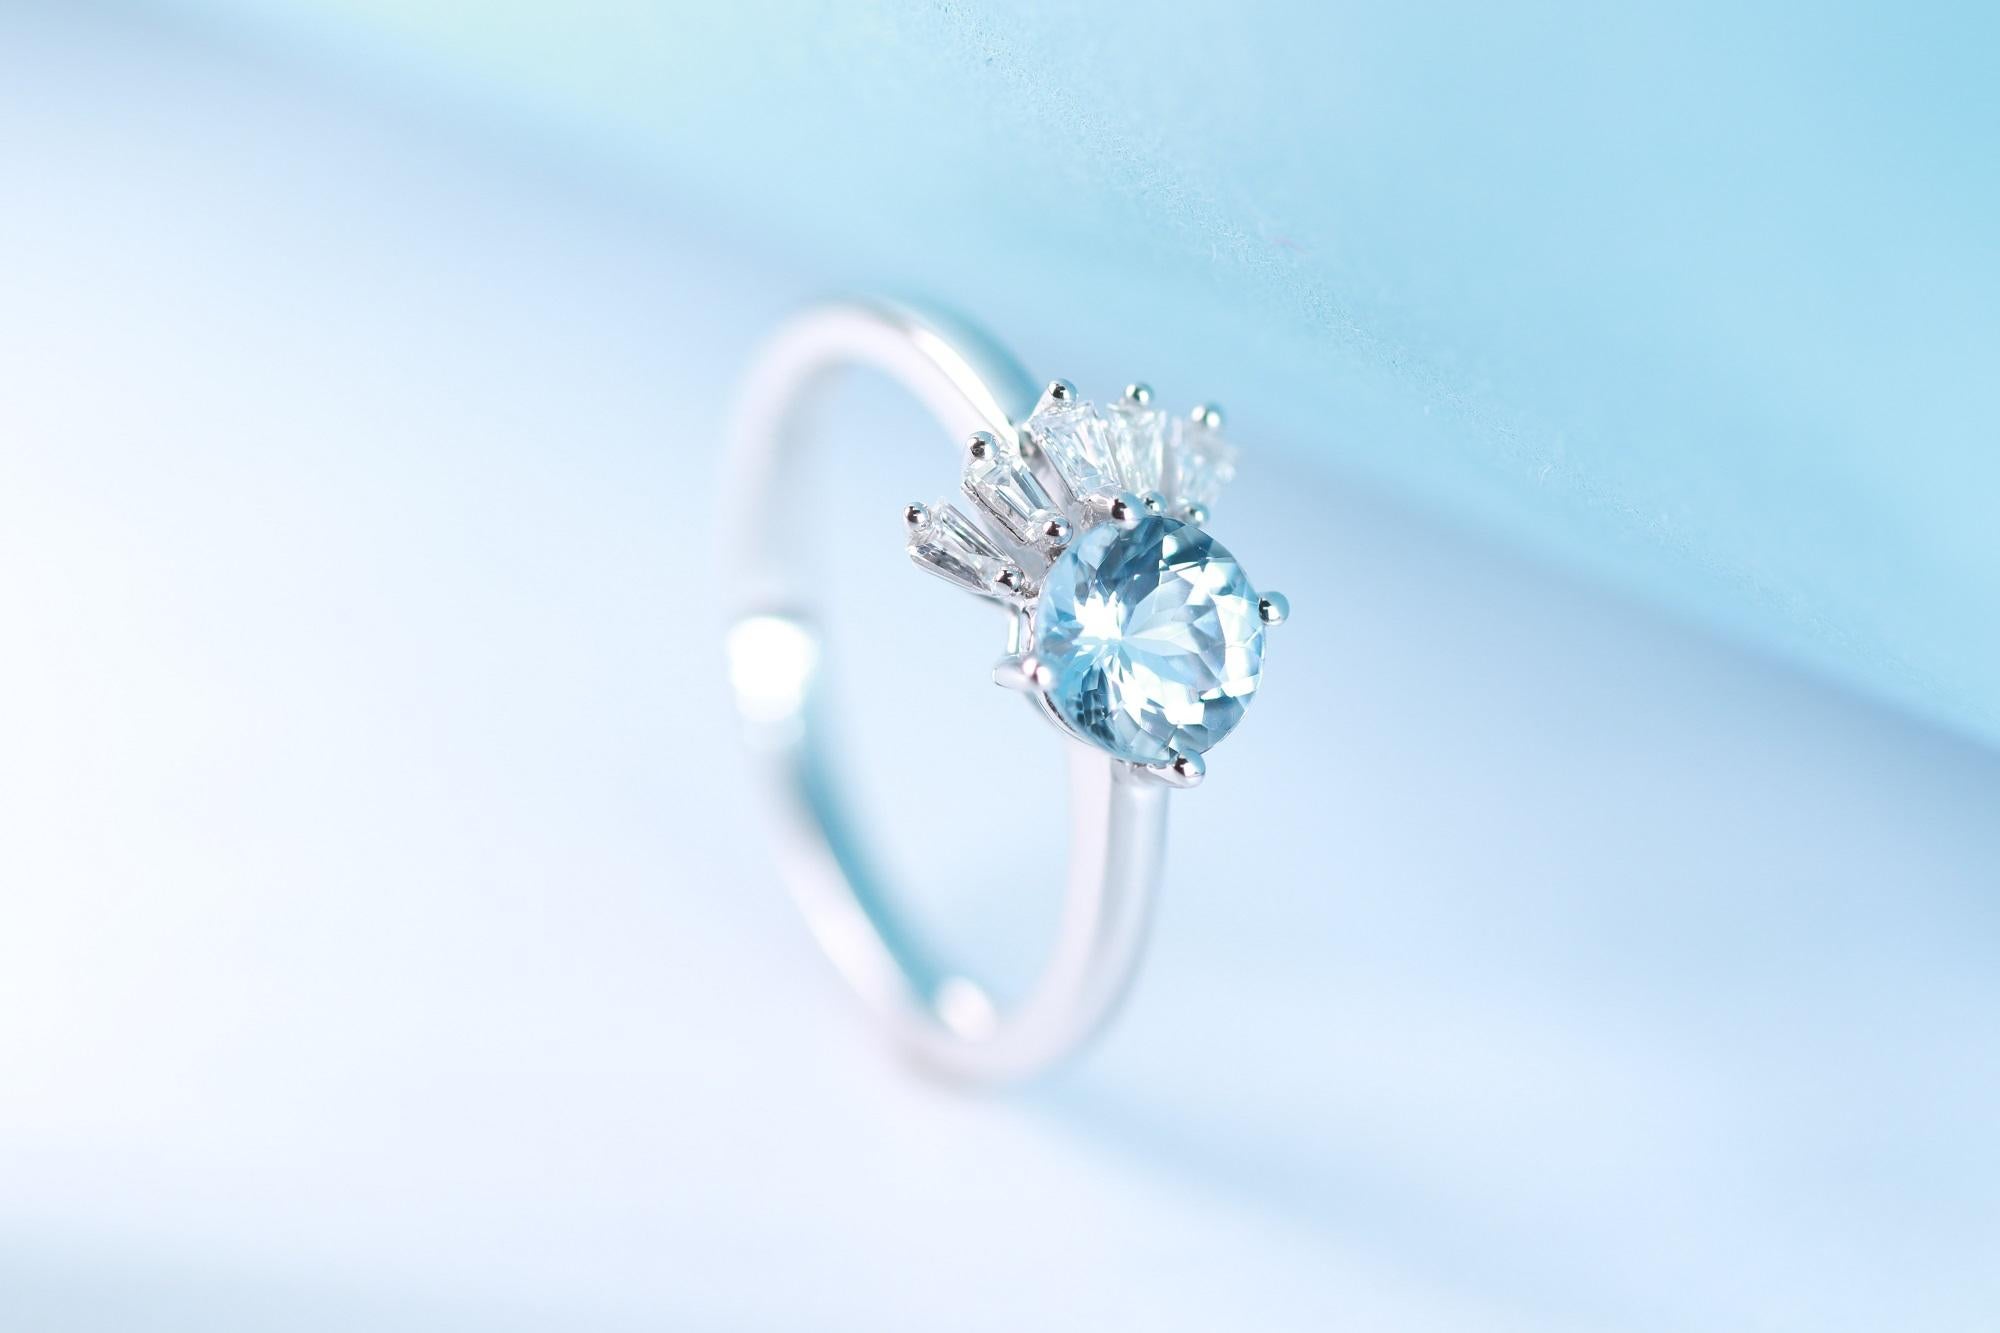 Stunning, timeless and classy eternity Unique Ring. Decorate yourself in luxury with this Gin & Grace Ring. The 18k White Gold jewelry boasts Round cut Prong Setting Genuine Aquamarine (1 pcs) 0.56 Carat, along with Natural Baguette cut white